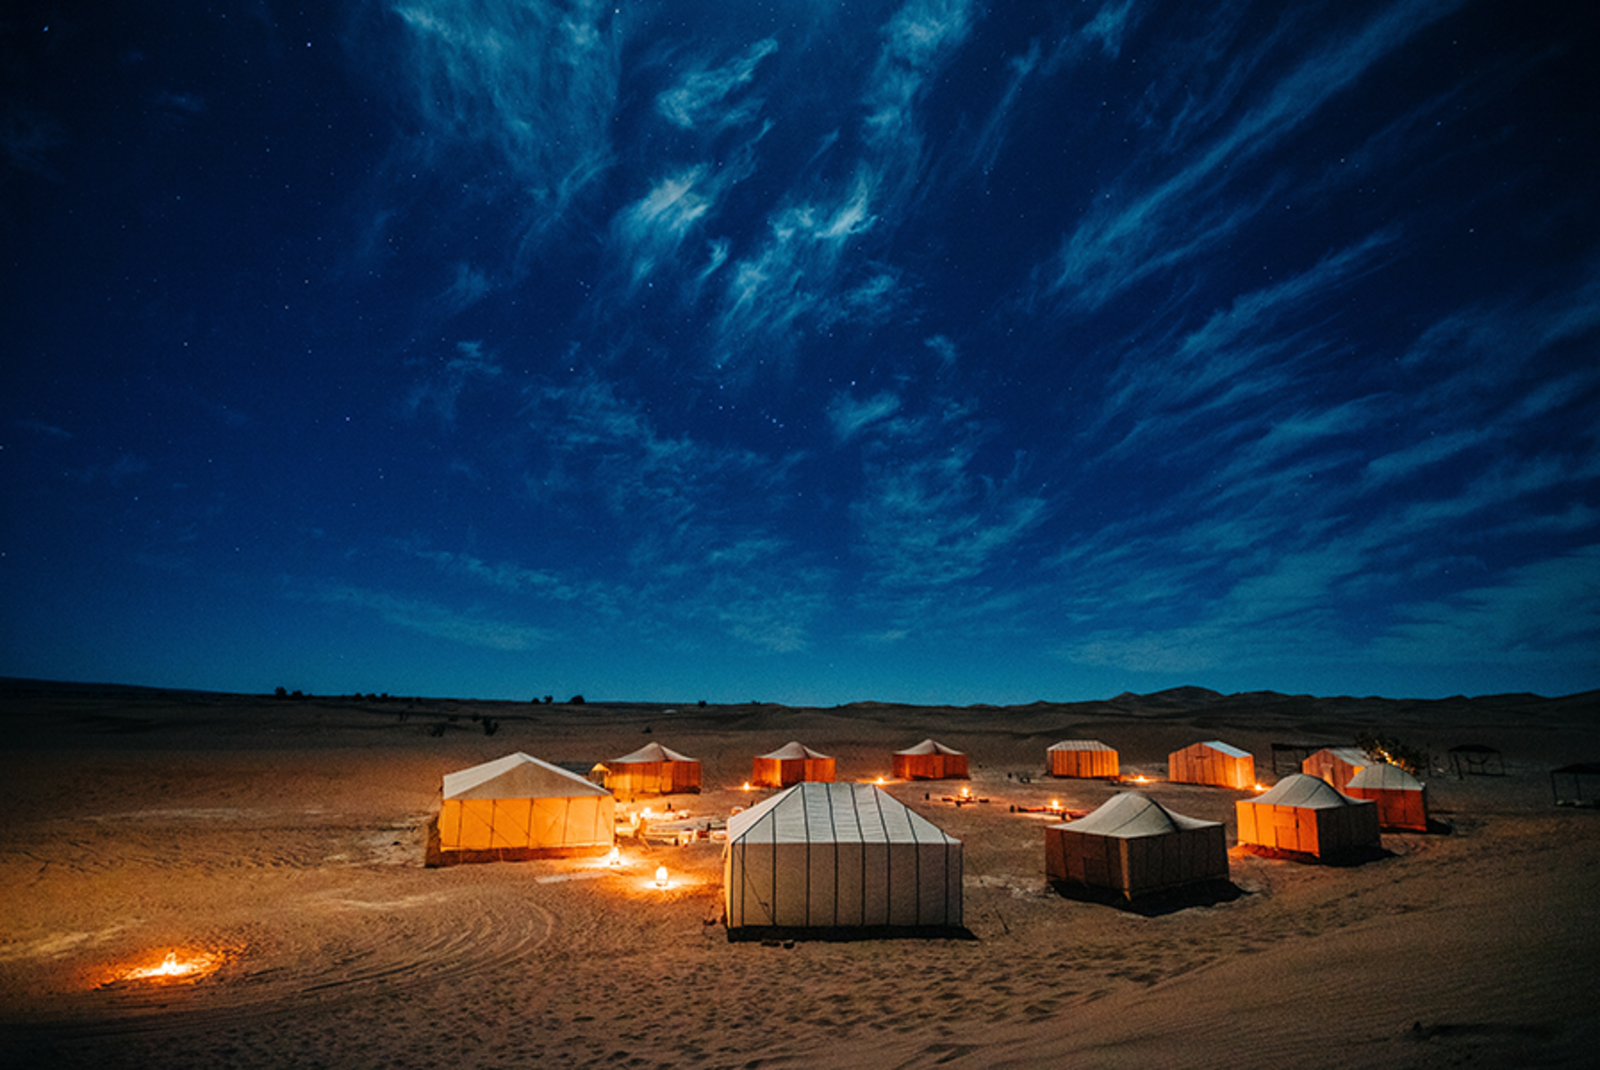 Morocco Sahara desert campfire white tents clue sky with clouds and sand